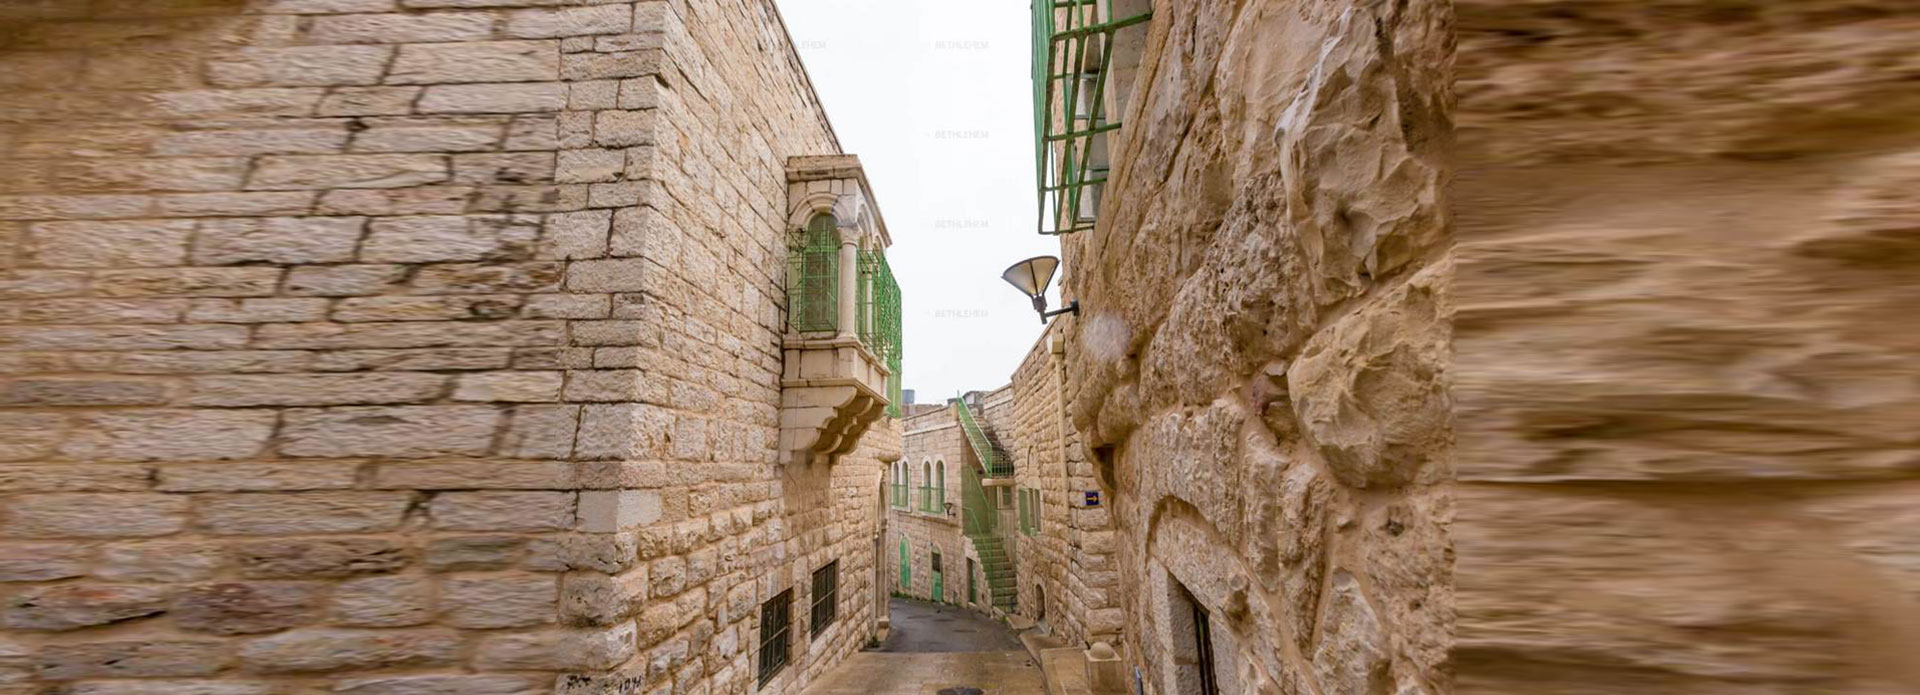 The Old City of Beit Jala